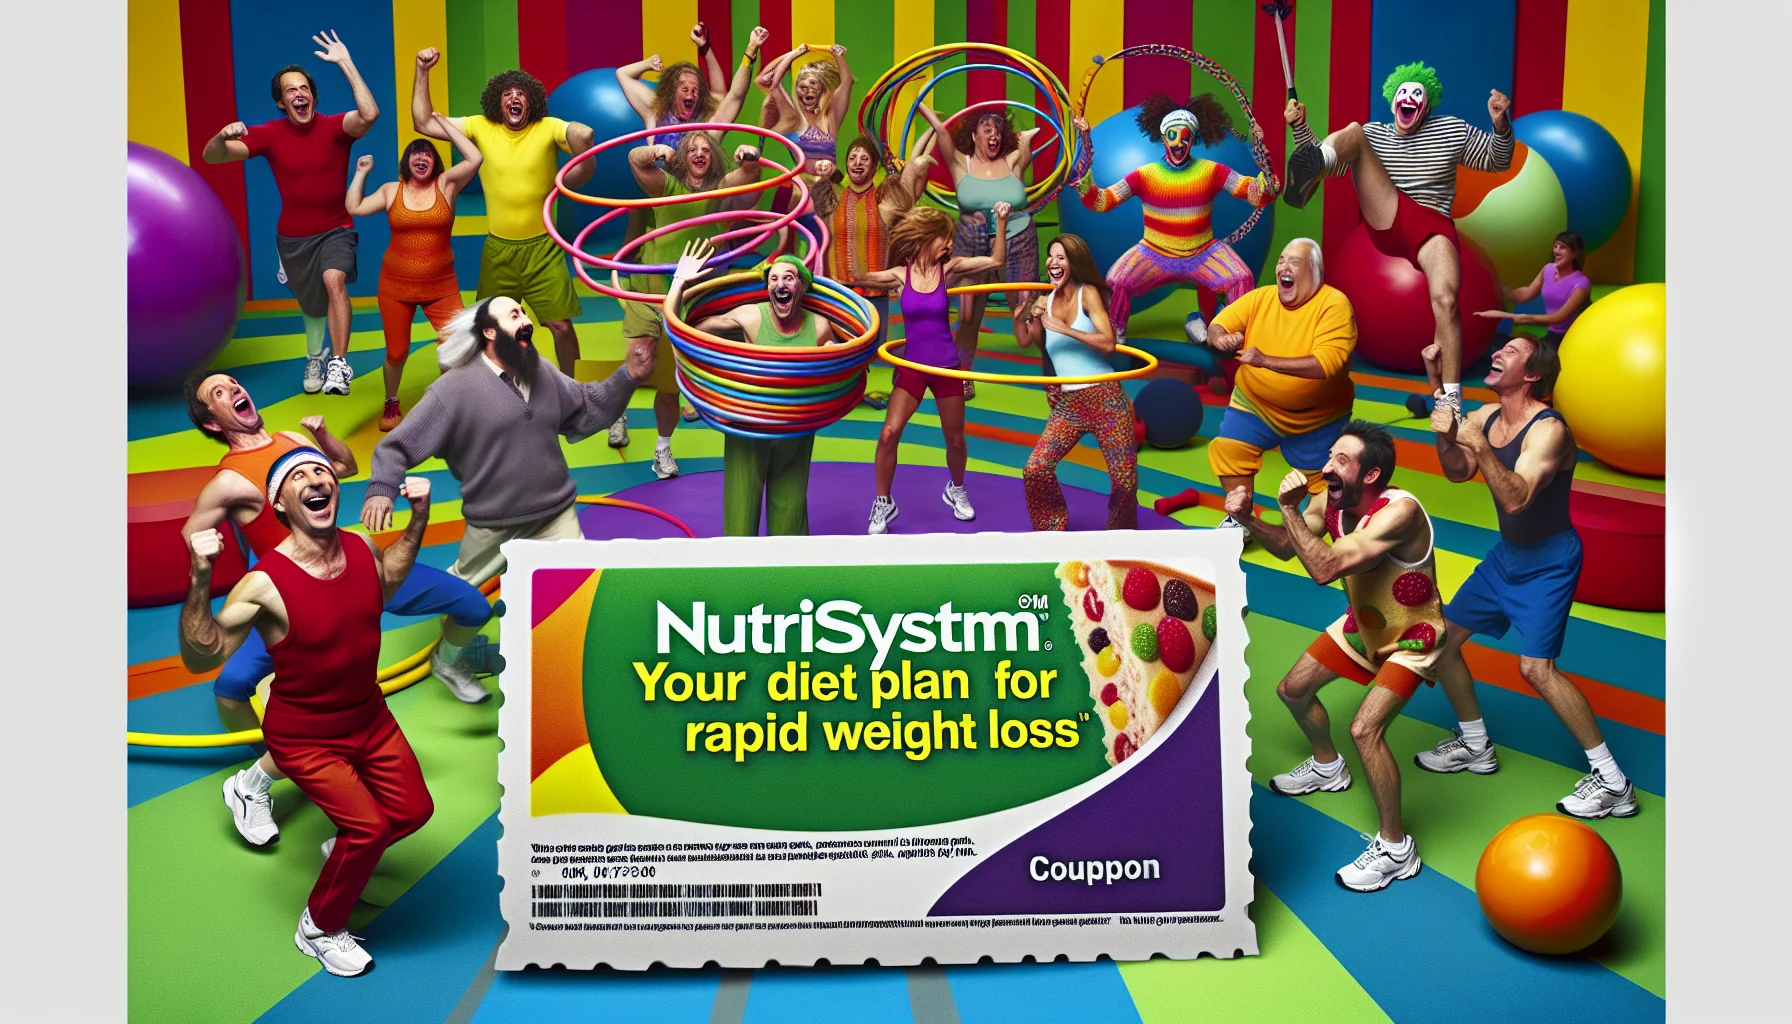 Imagine a humorous picture displaying a Nutrisystem Coupon with the caption 'Your Diet Plan for Rapid Weight Loss' strategically placed. This image captures an eccentric and lively gym scenario. A group of people of varying descents such as Caucasian, Hispanic, Middle Eastern, some ages, and both genders are laughing and interacting in an energetic, comical fashion as they exercise using humorous and unconventional gym equipment, like oversized hula hoops, bouncy balls, and exaggerated dumbbells. Vibrant gym colors fill the background, promoting an enticing, inviting atmosphere to exercise and promote their rapid weight loss journey.